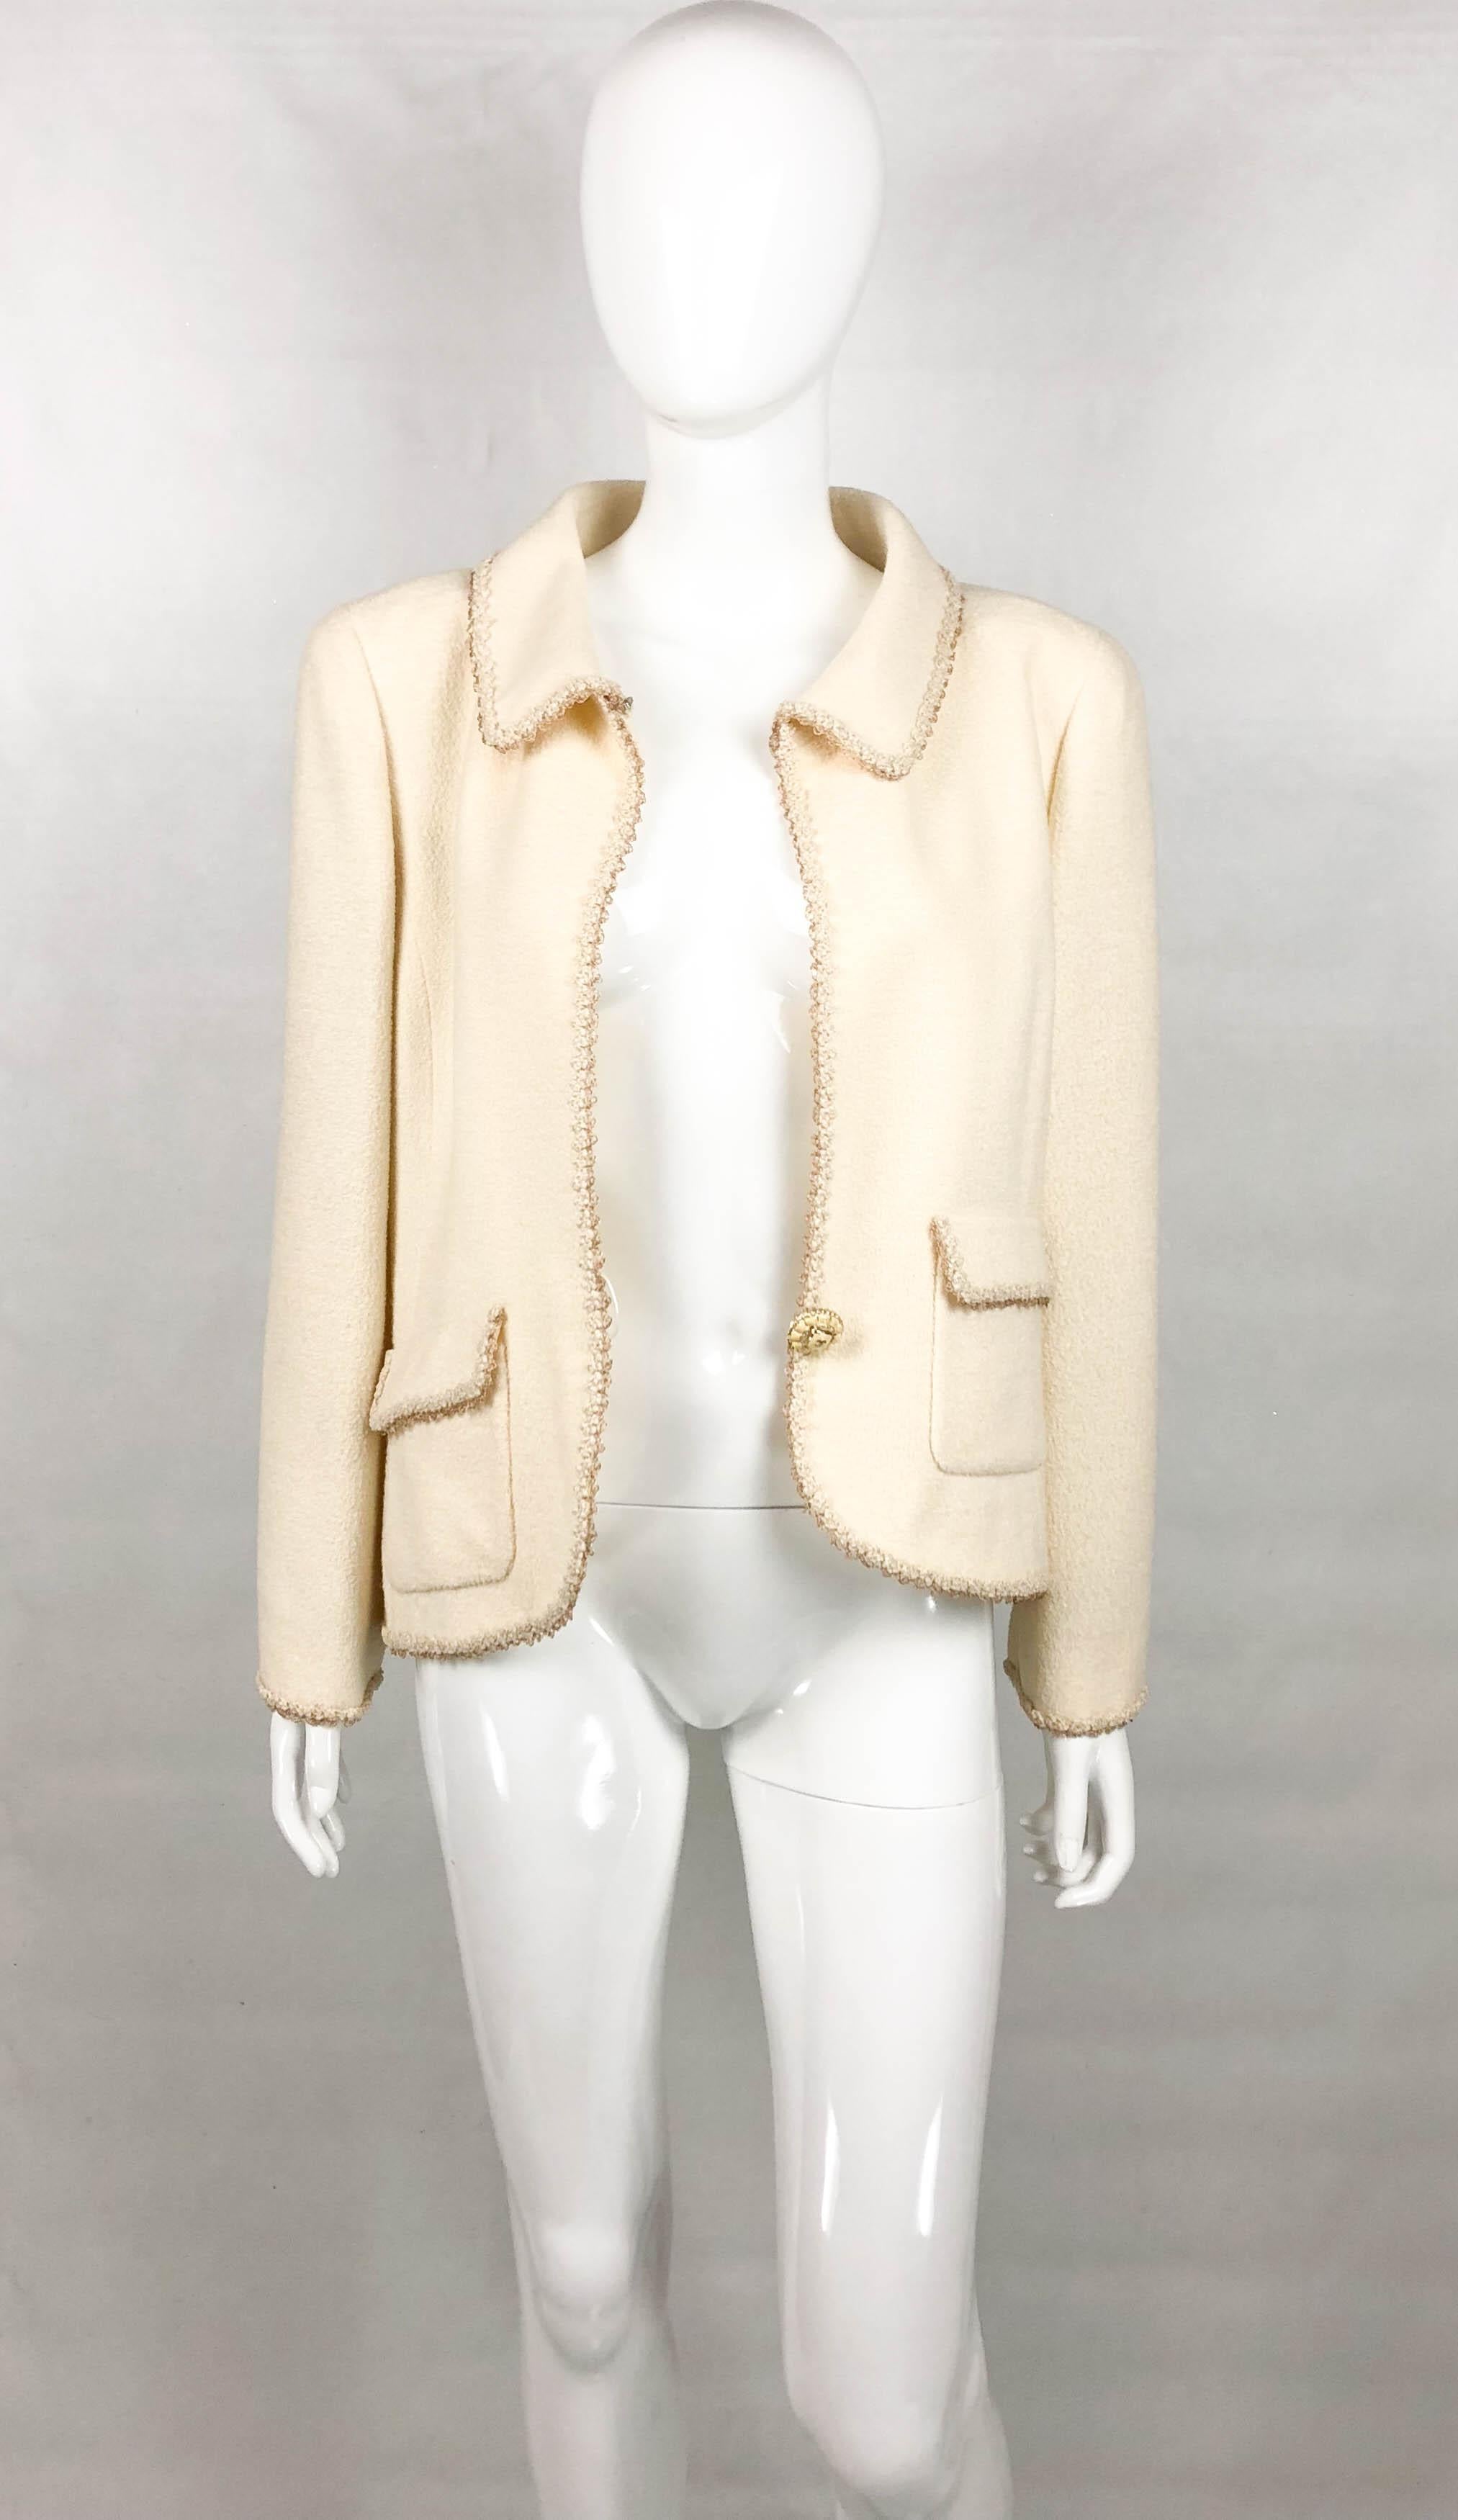 Chanel Runway Look Cream Wool Blend Jacket. This beautiful cream jacket by Chanel was created for the 2010 Cruise Collection. A model can be seen wearing an identical piece on the runway (please refer to photos). The jacket features gold thread